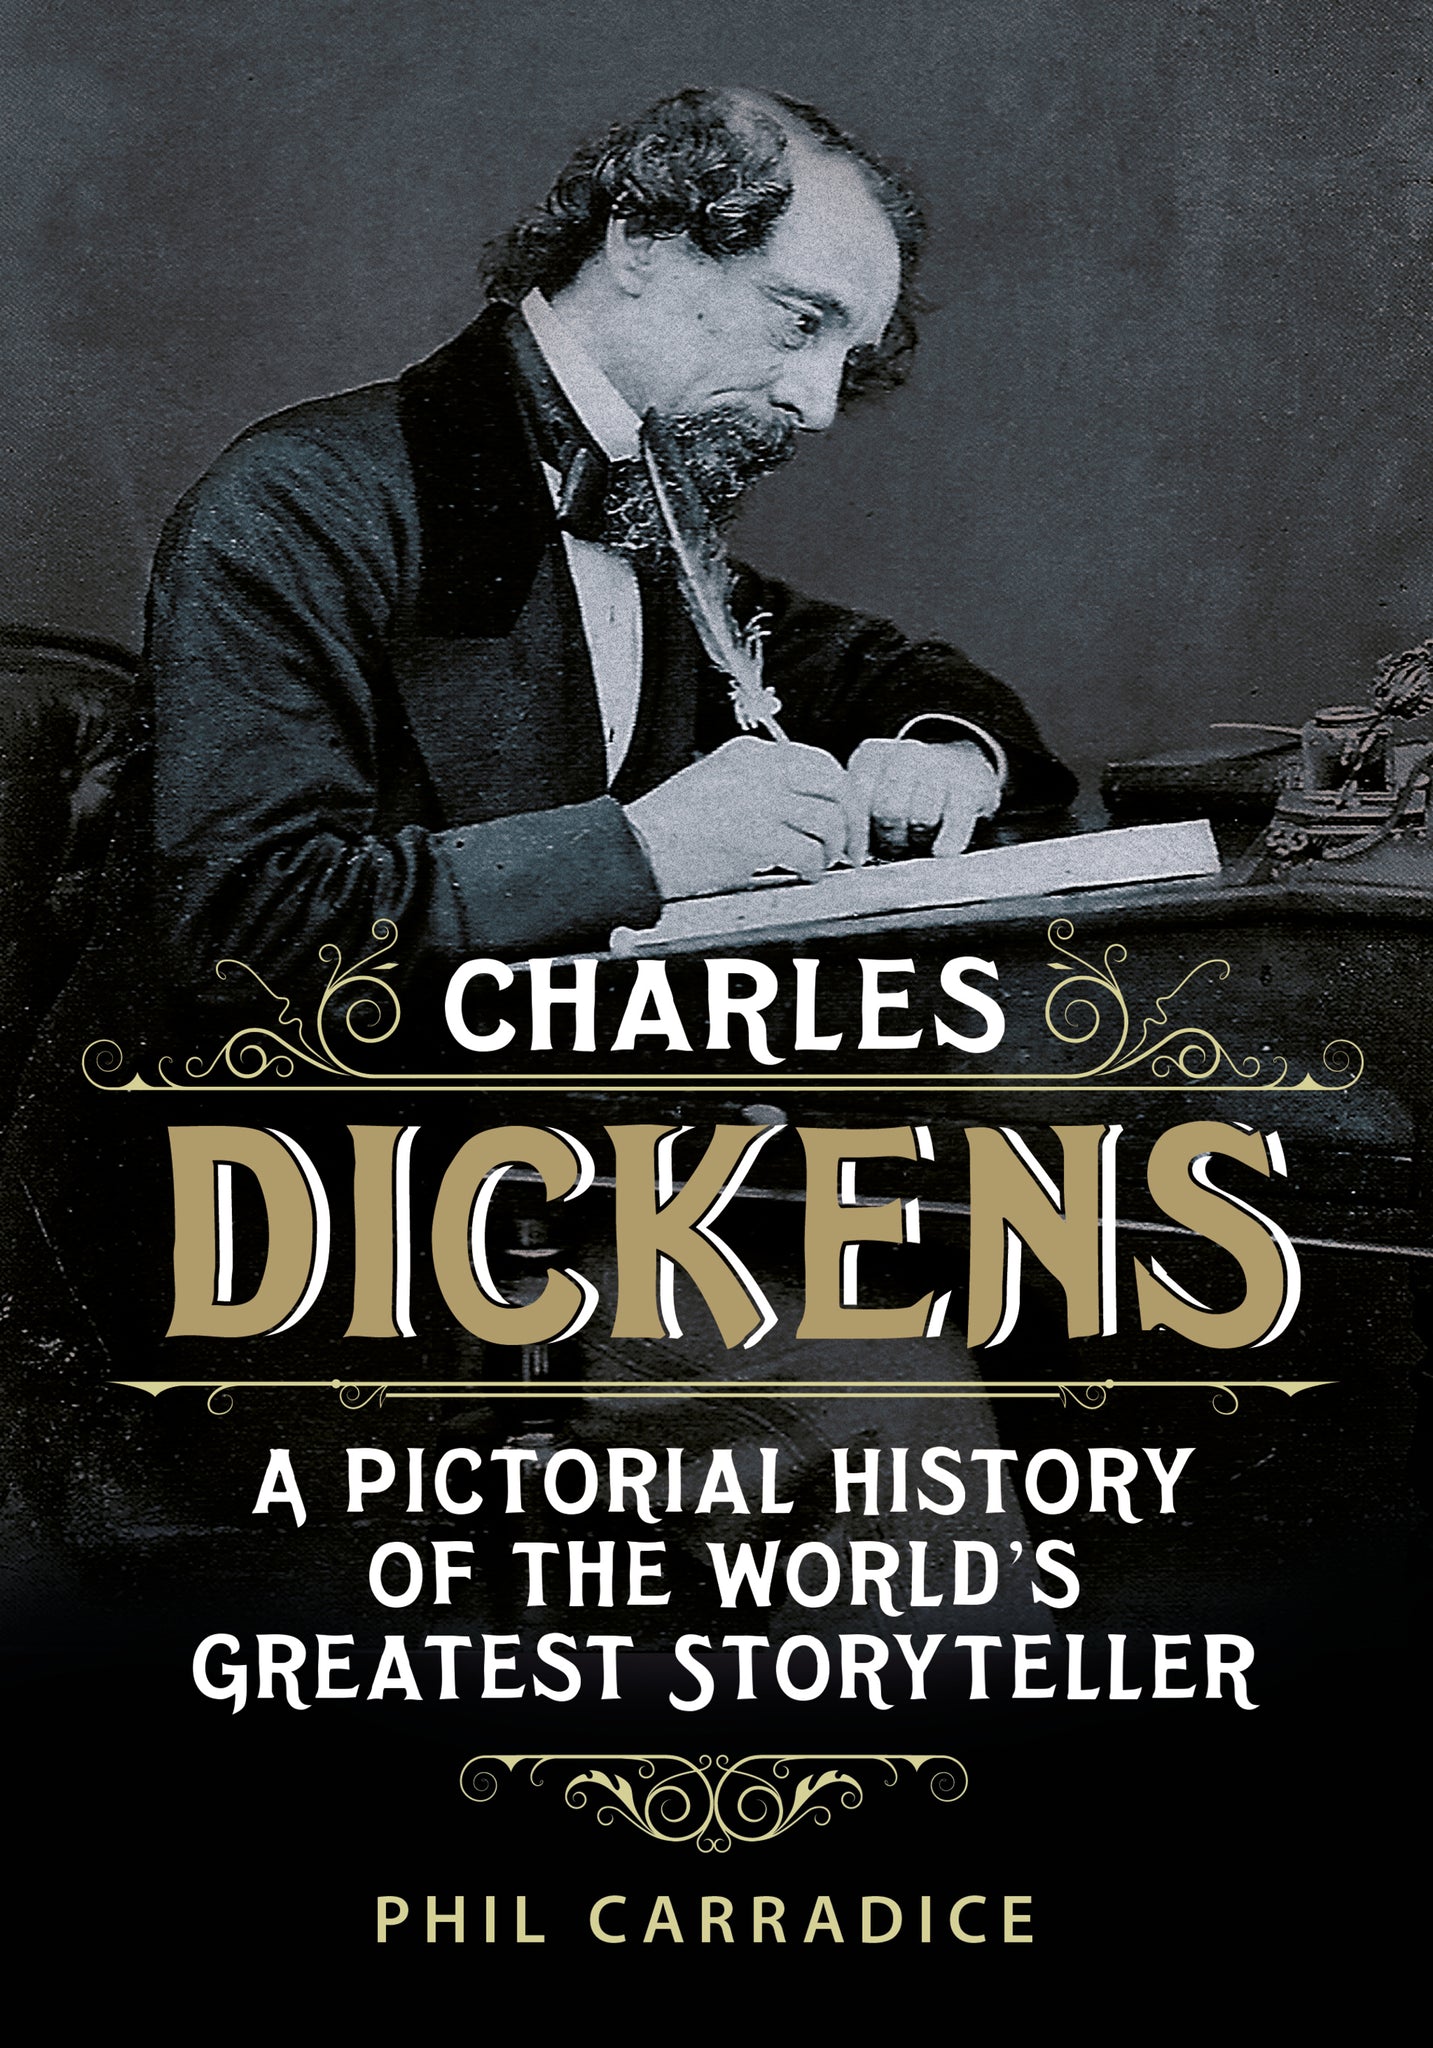 Charles Dickens: A Pictorial Biography of the World’s Greatest Storyteller